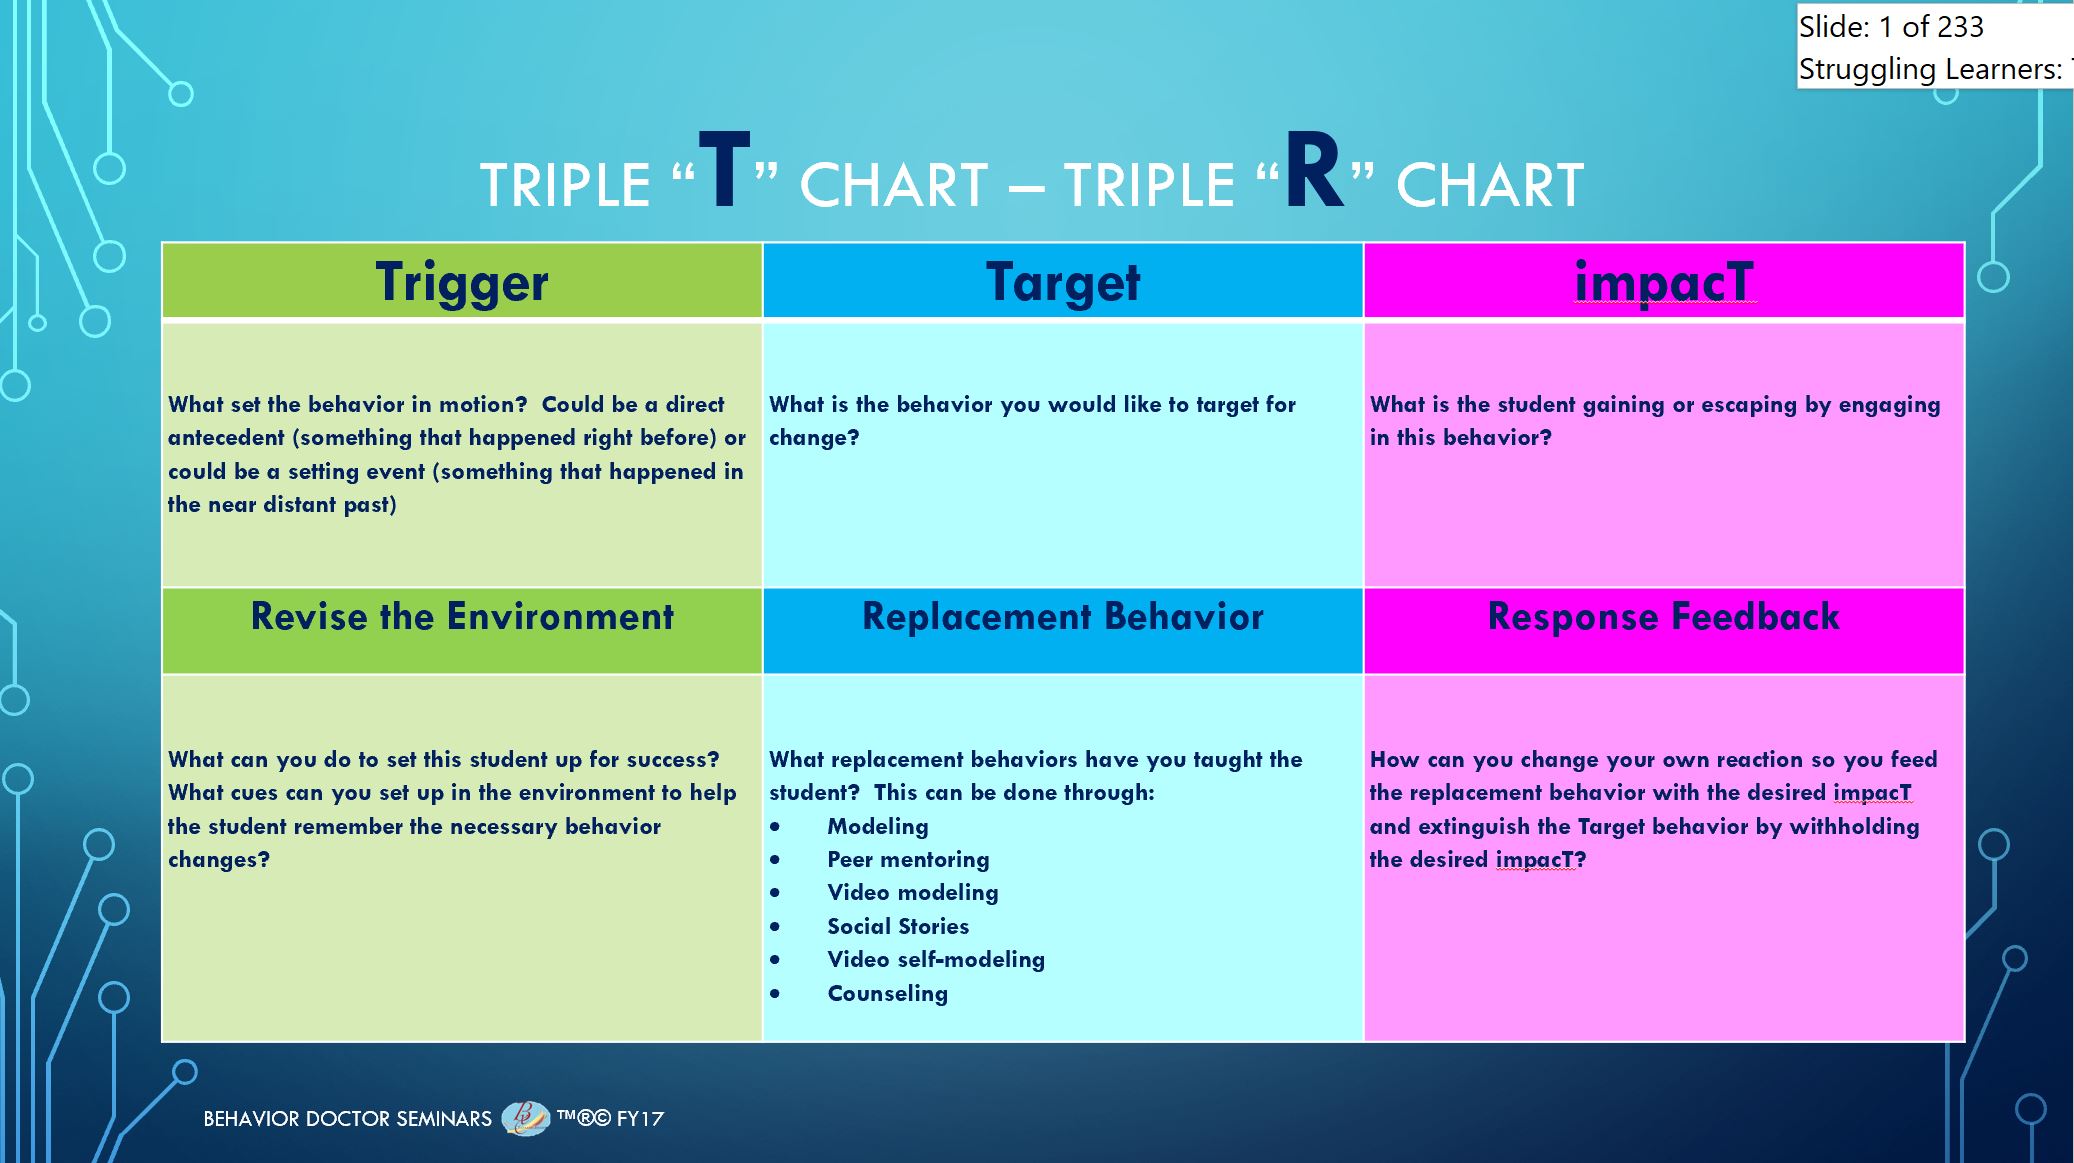 This is a grid showing the trigger, target, impact of a summary statement with a grid of a behavioral intervention plan